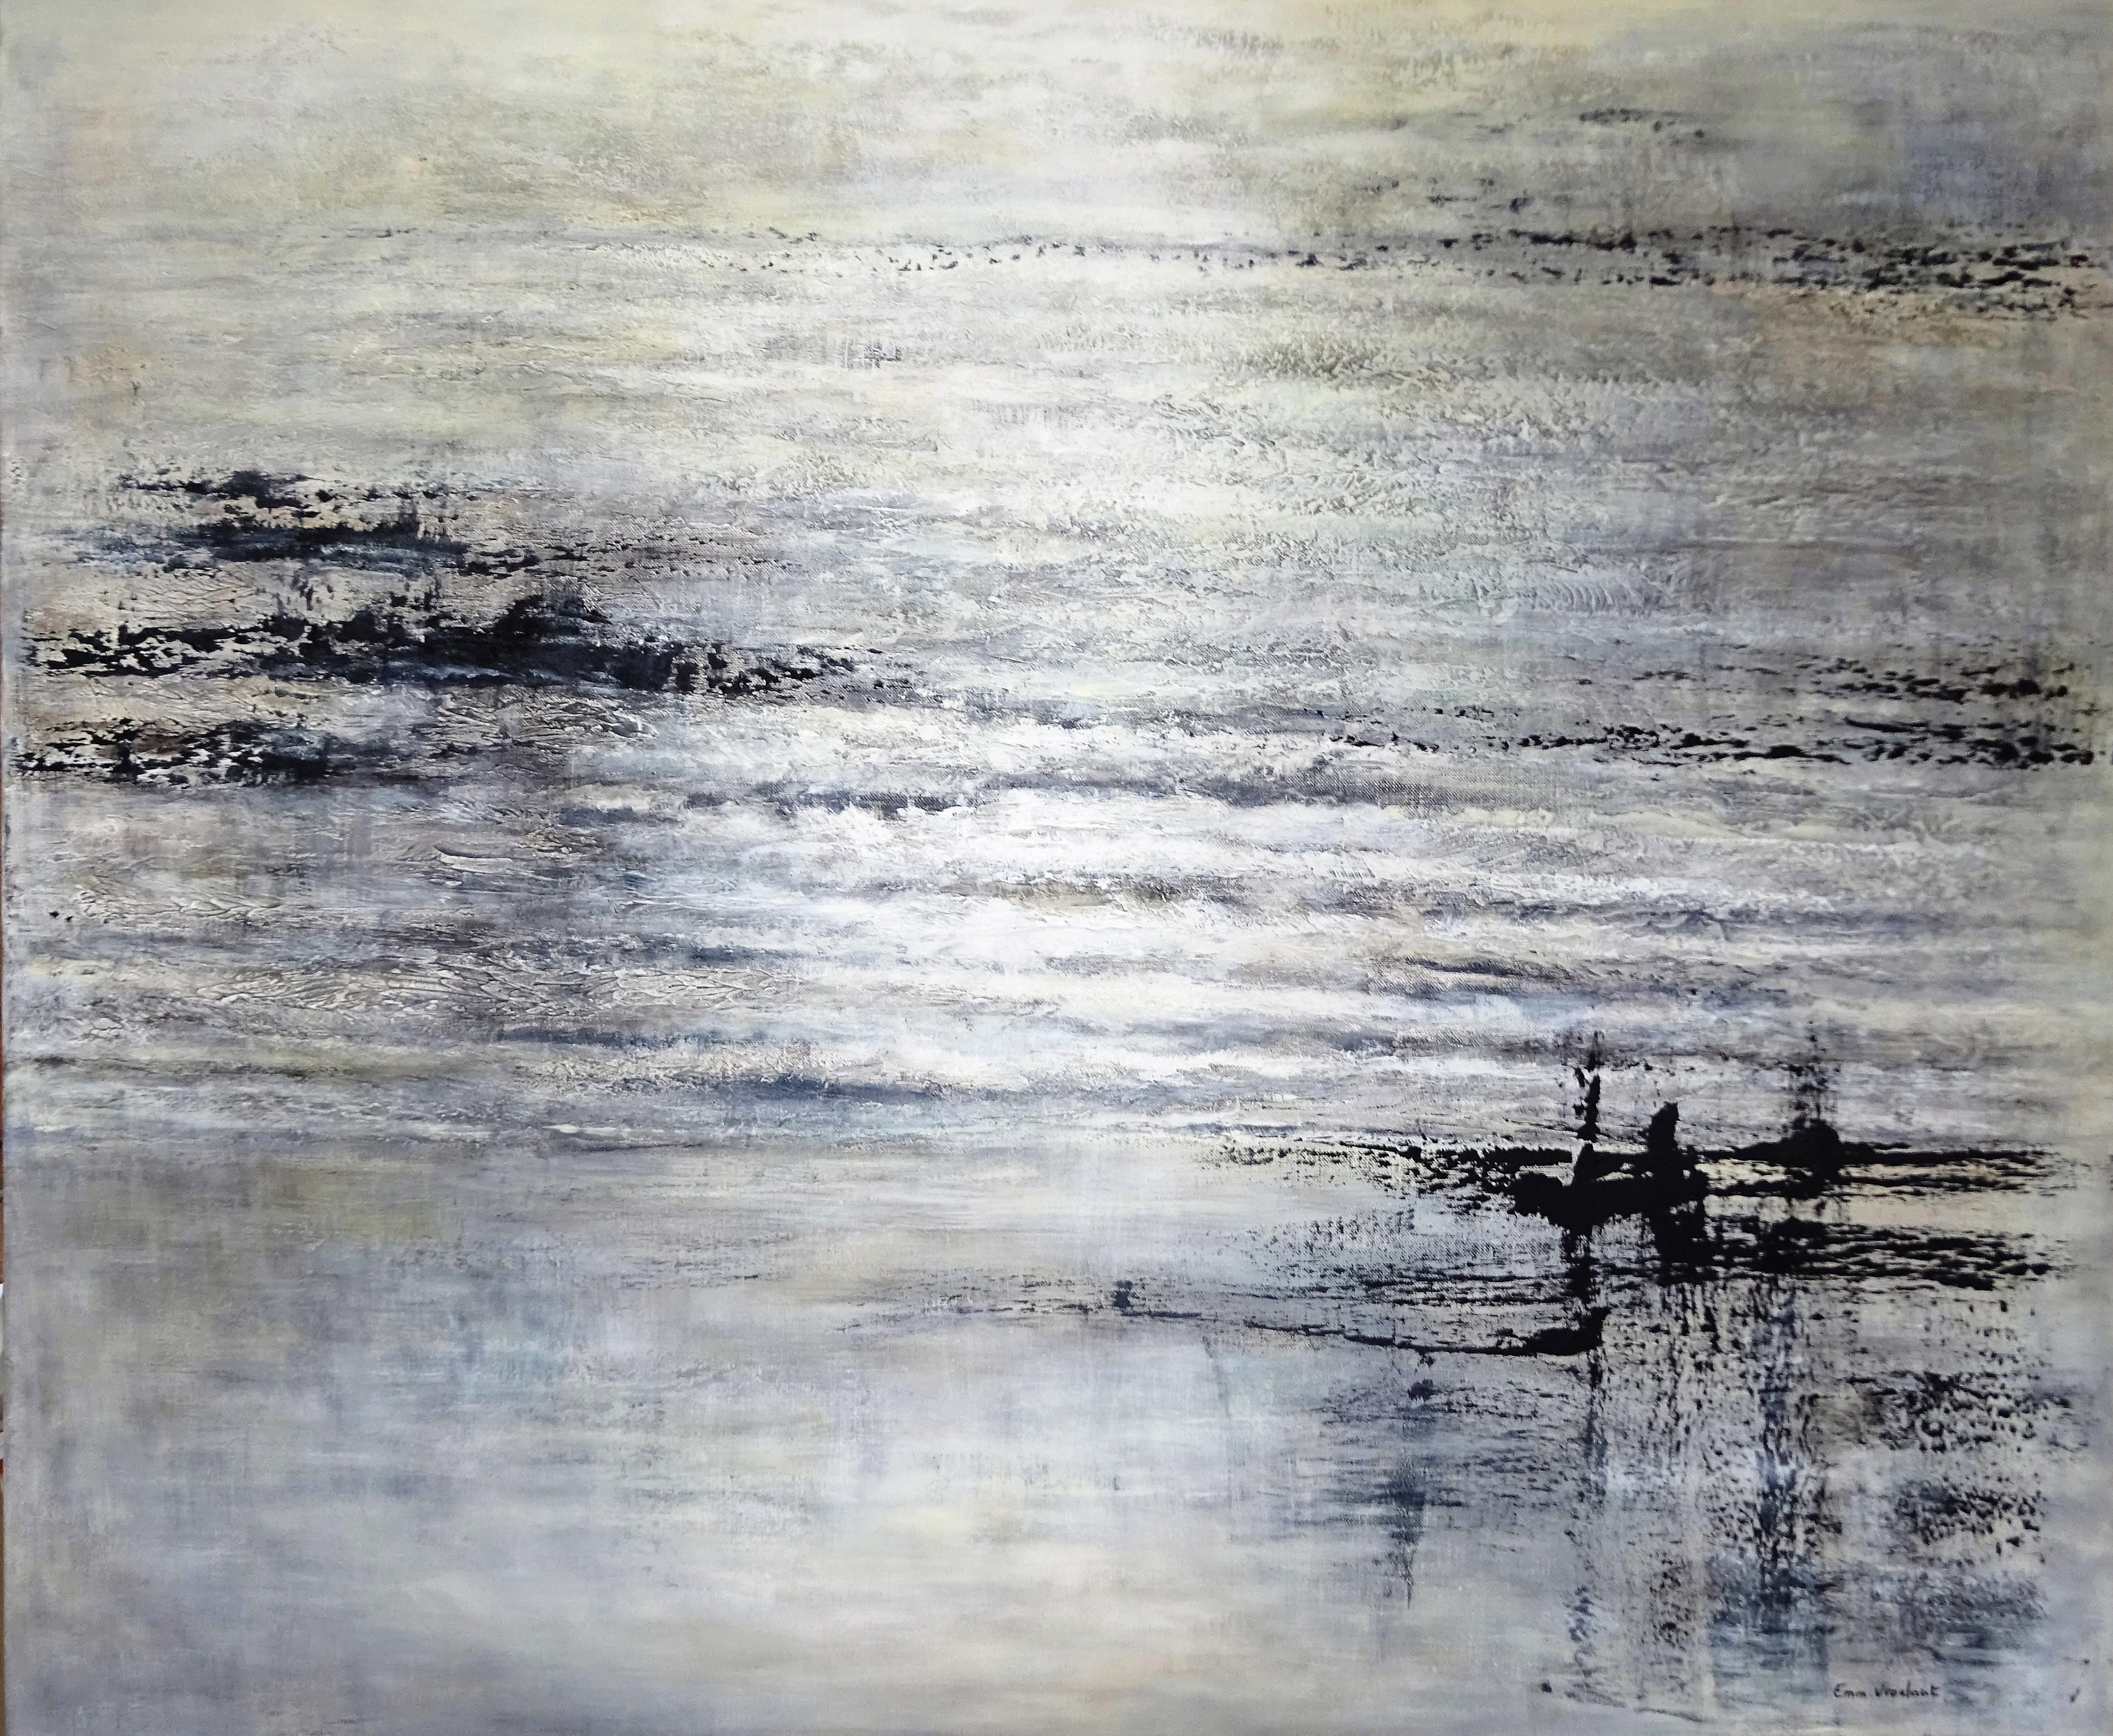 abstract acrylic black white linen canvas 100x120cm "Along the water"